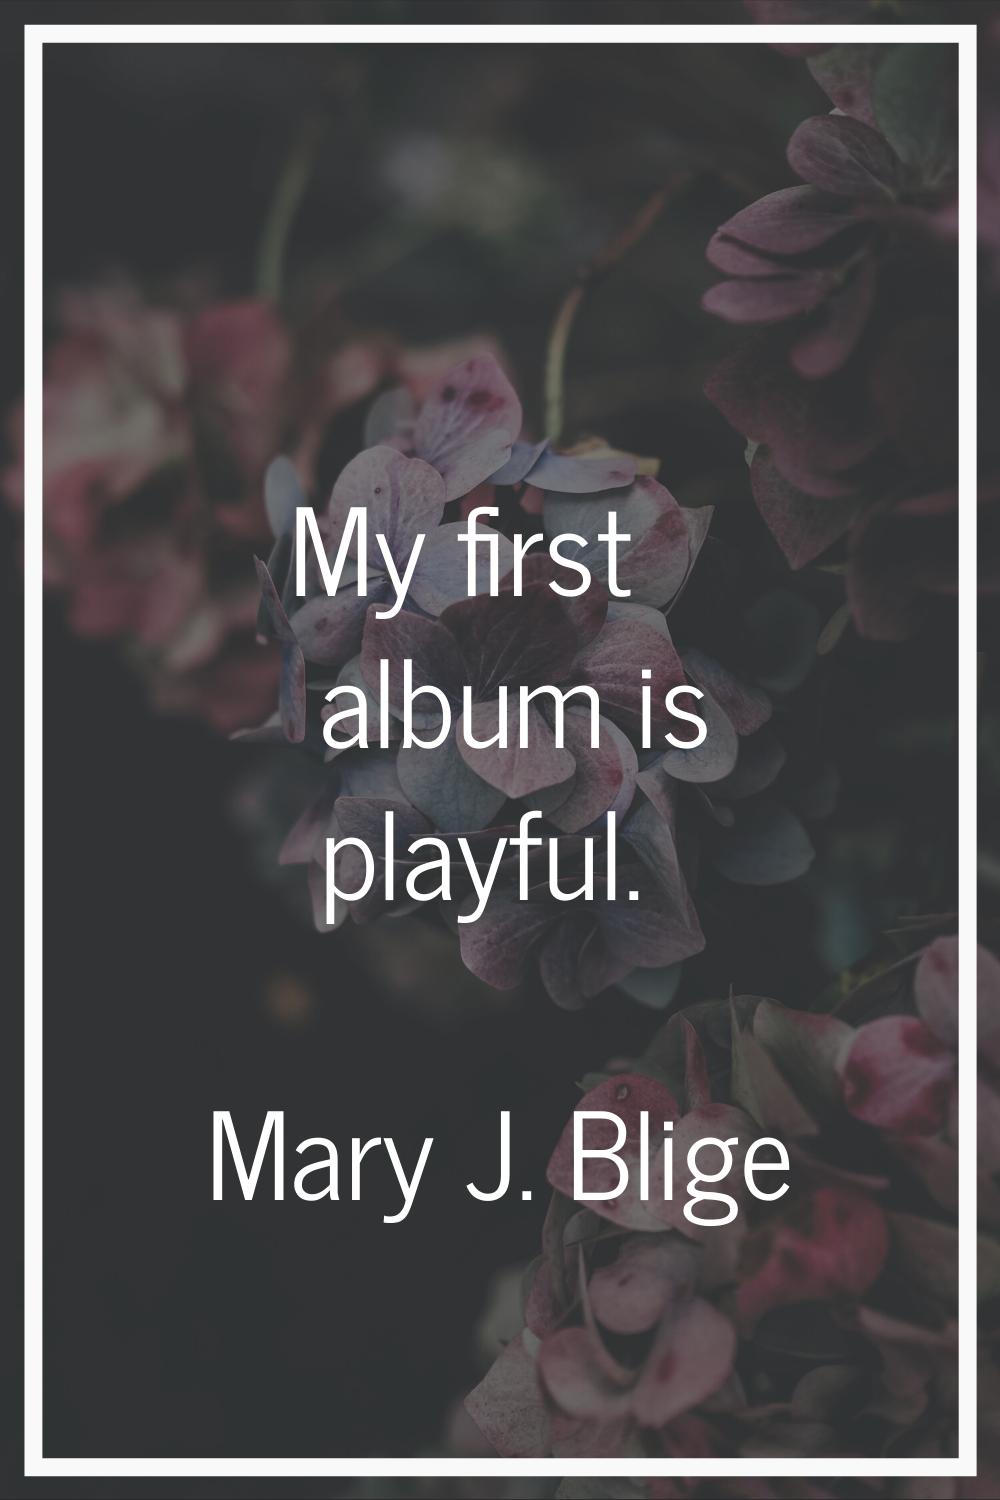 My first album is playful.